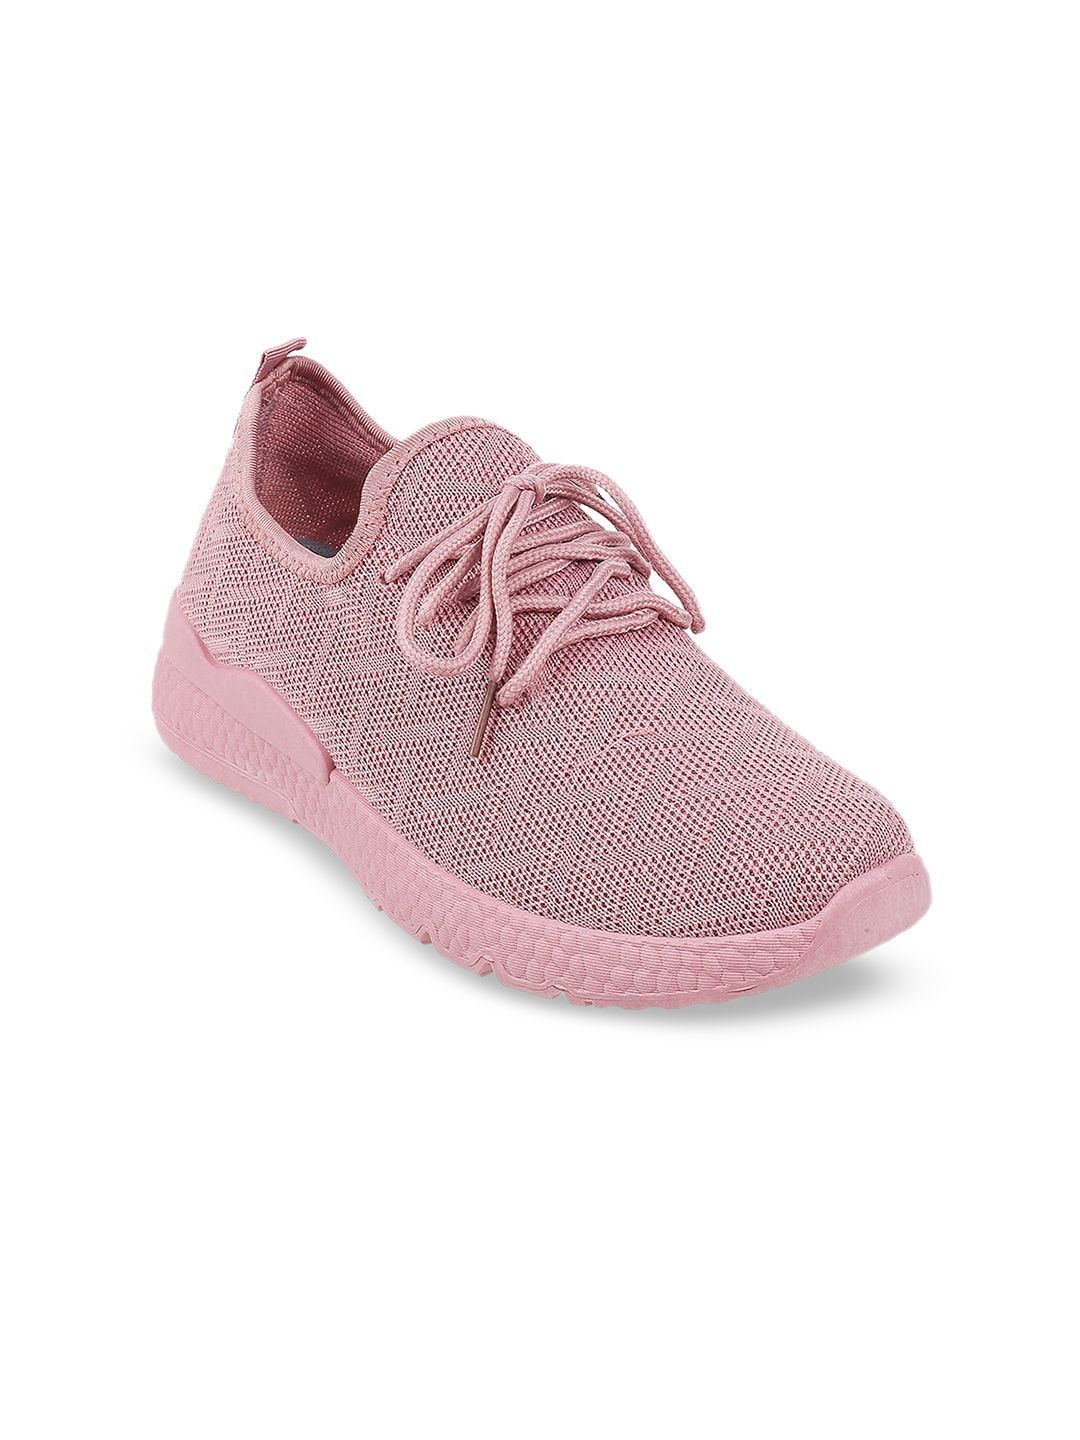 WALKWAY by Metro Women Peach-Coloured Textured Sneakers Price in India